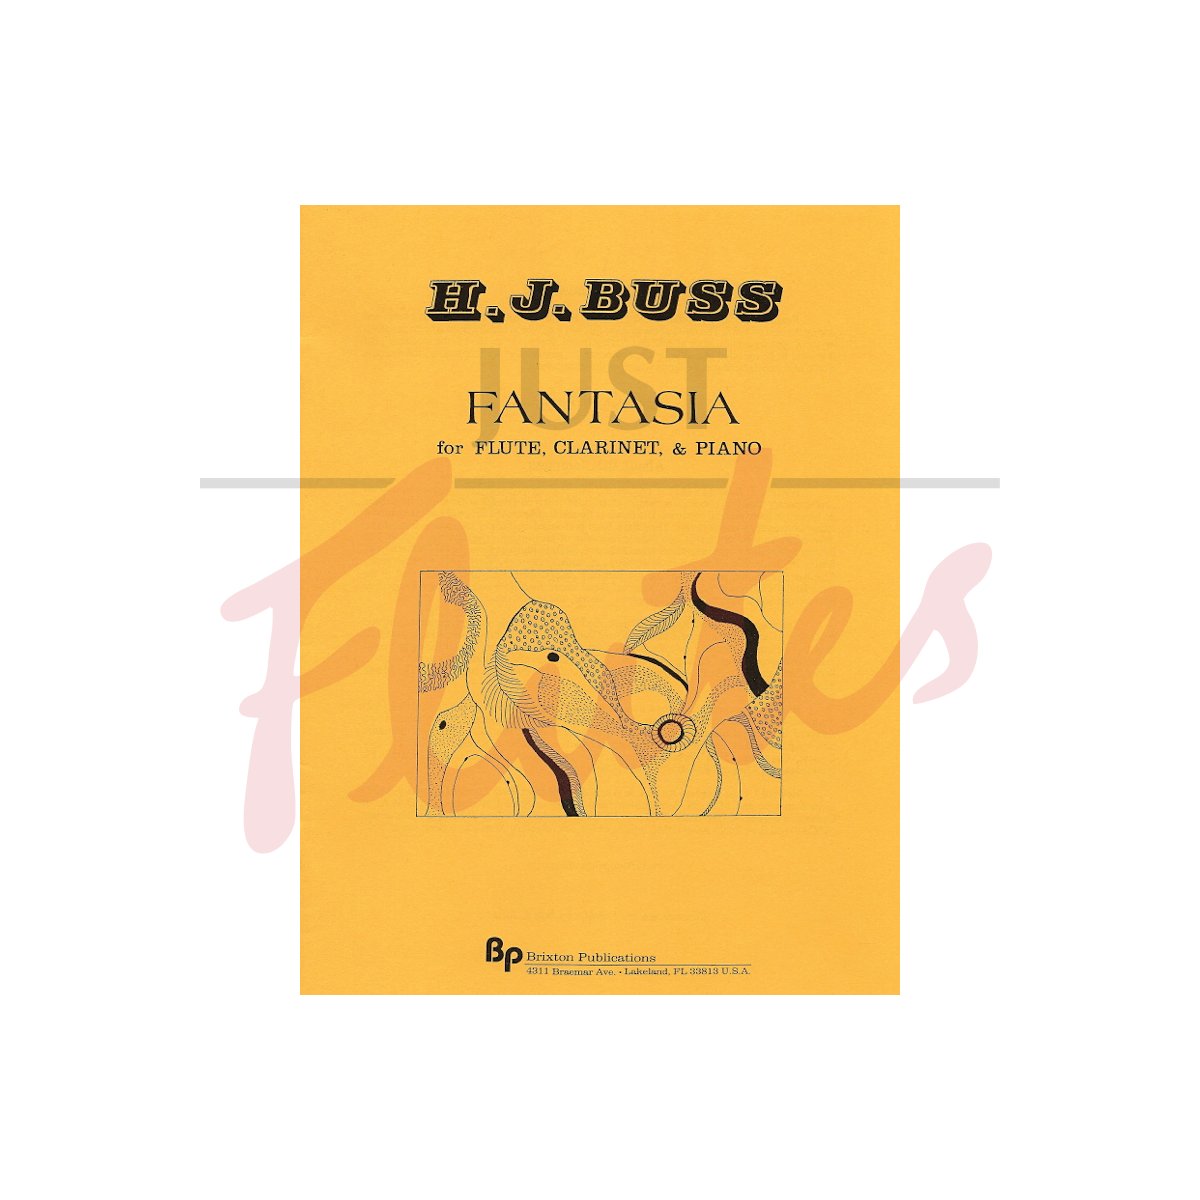 Fantasia for Flute, Clarinet and Piano